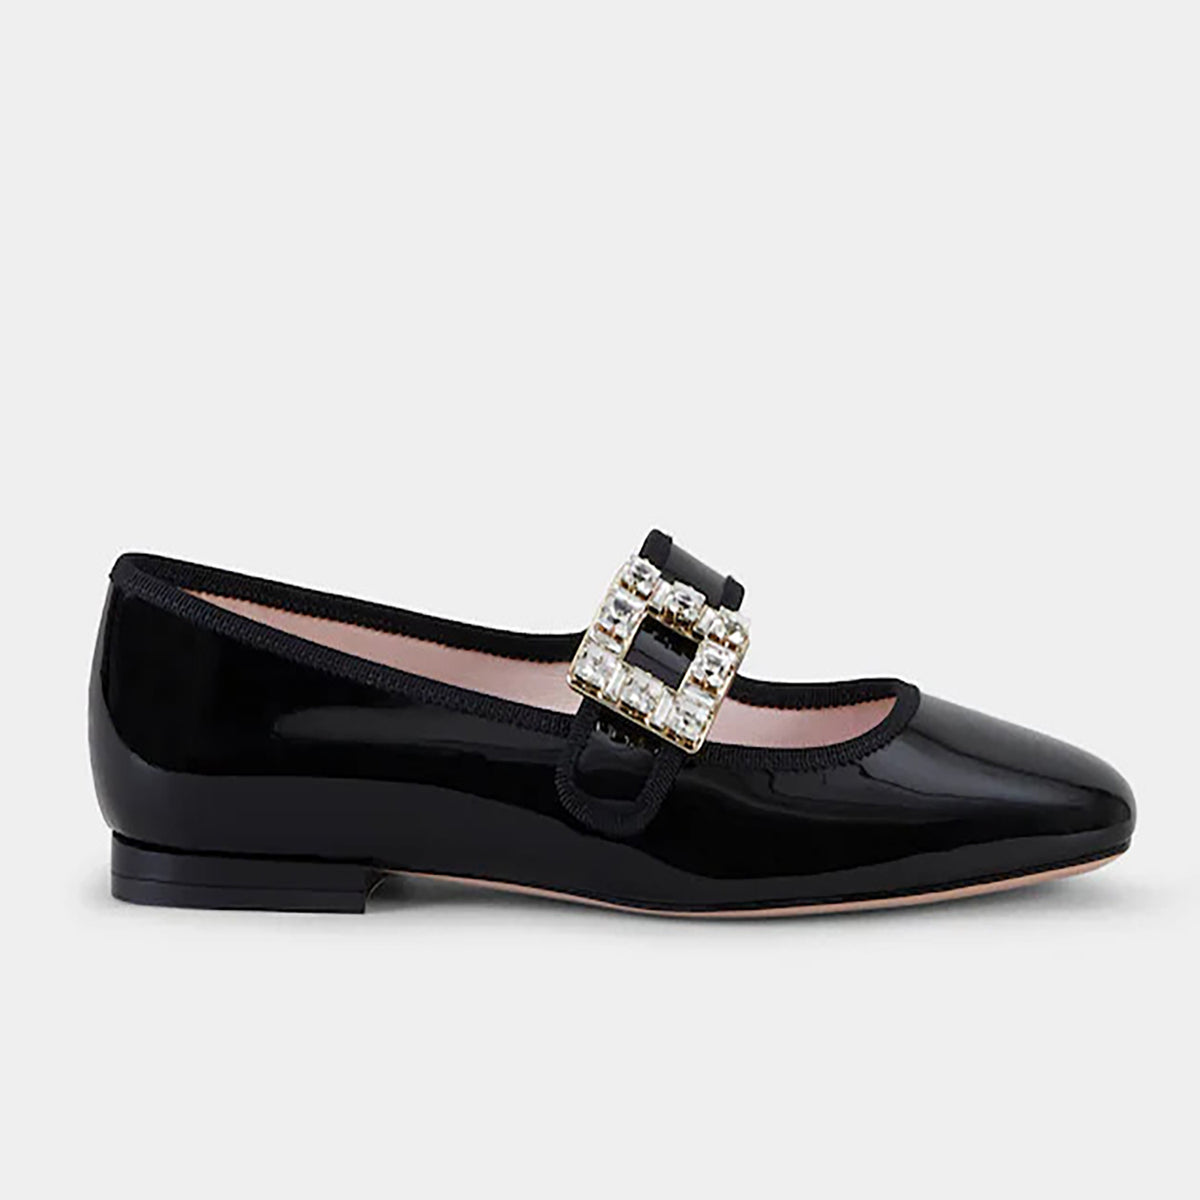 Très Vivier Strass Buckle Babies Ballerinas in Patent Leather